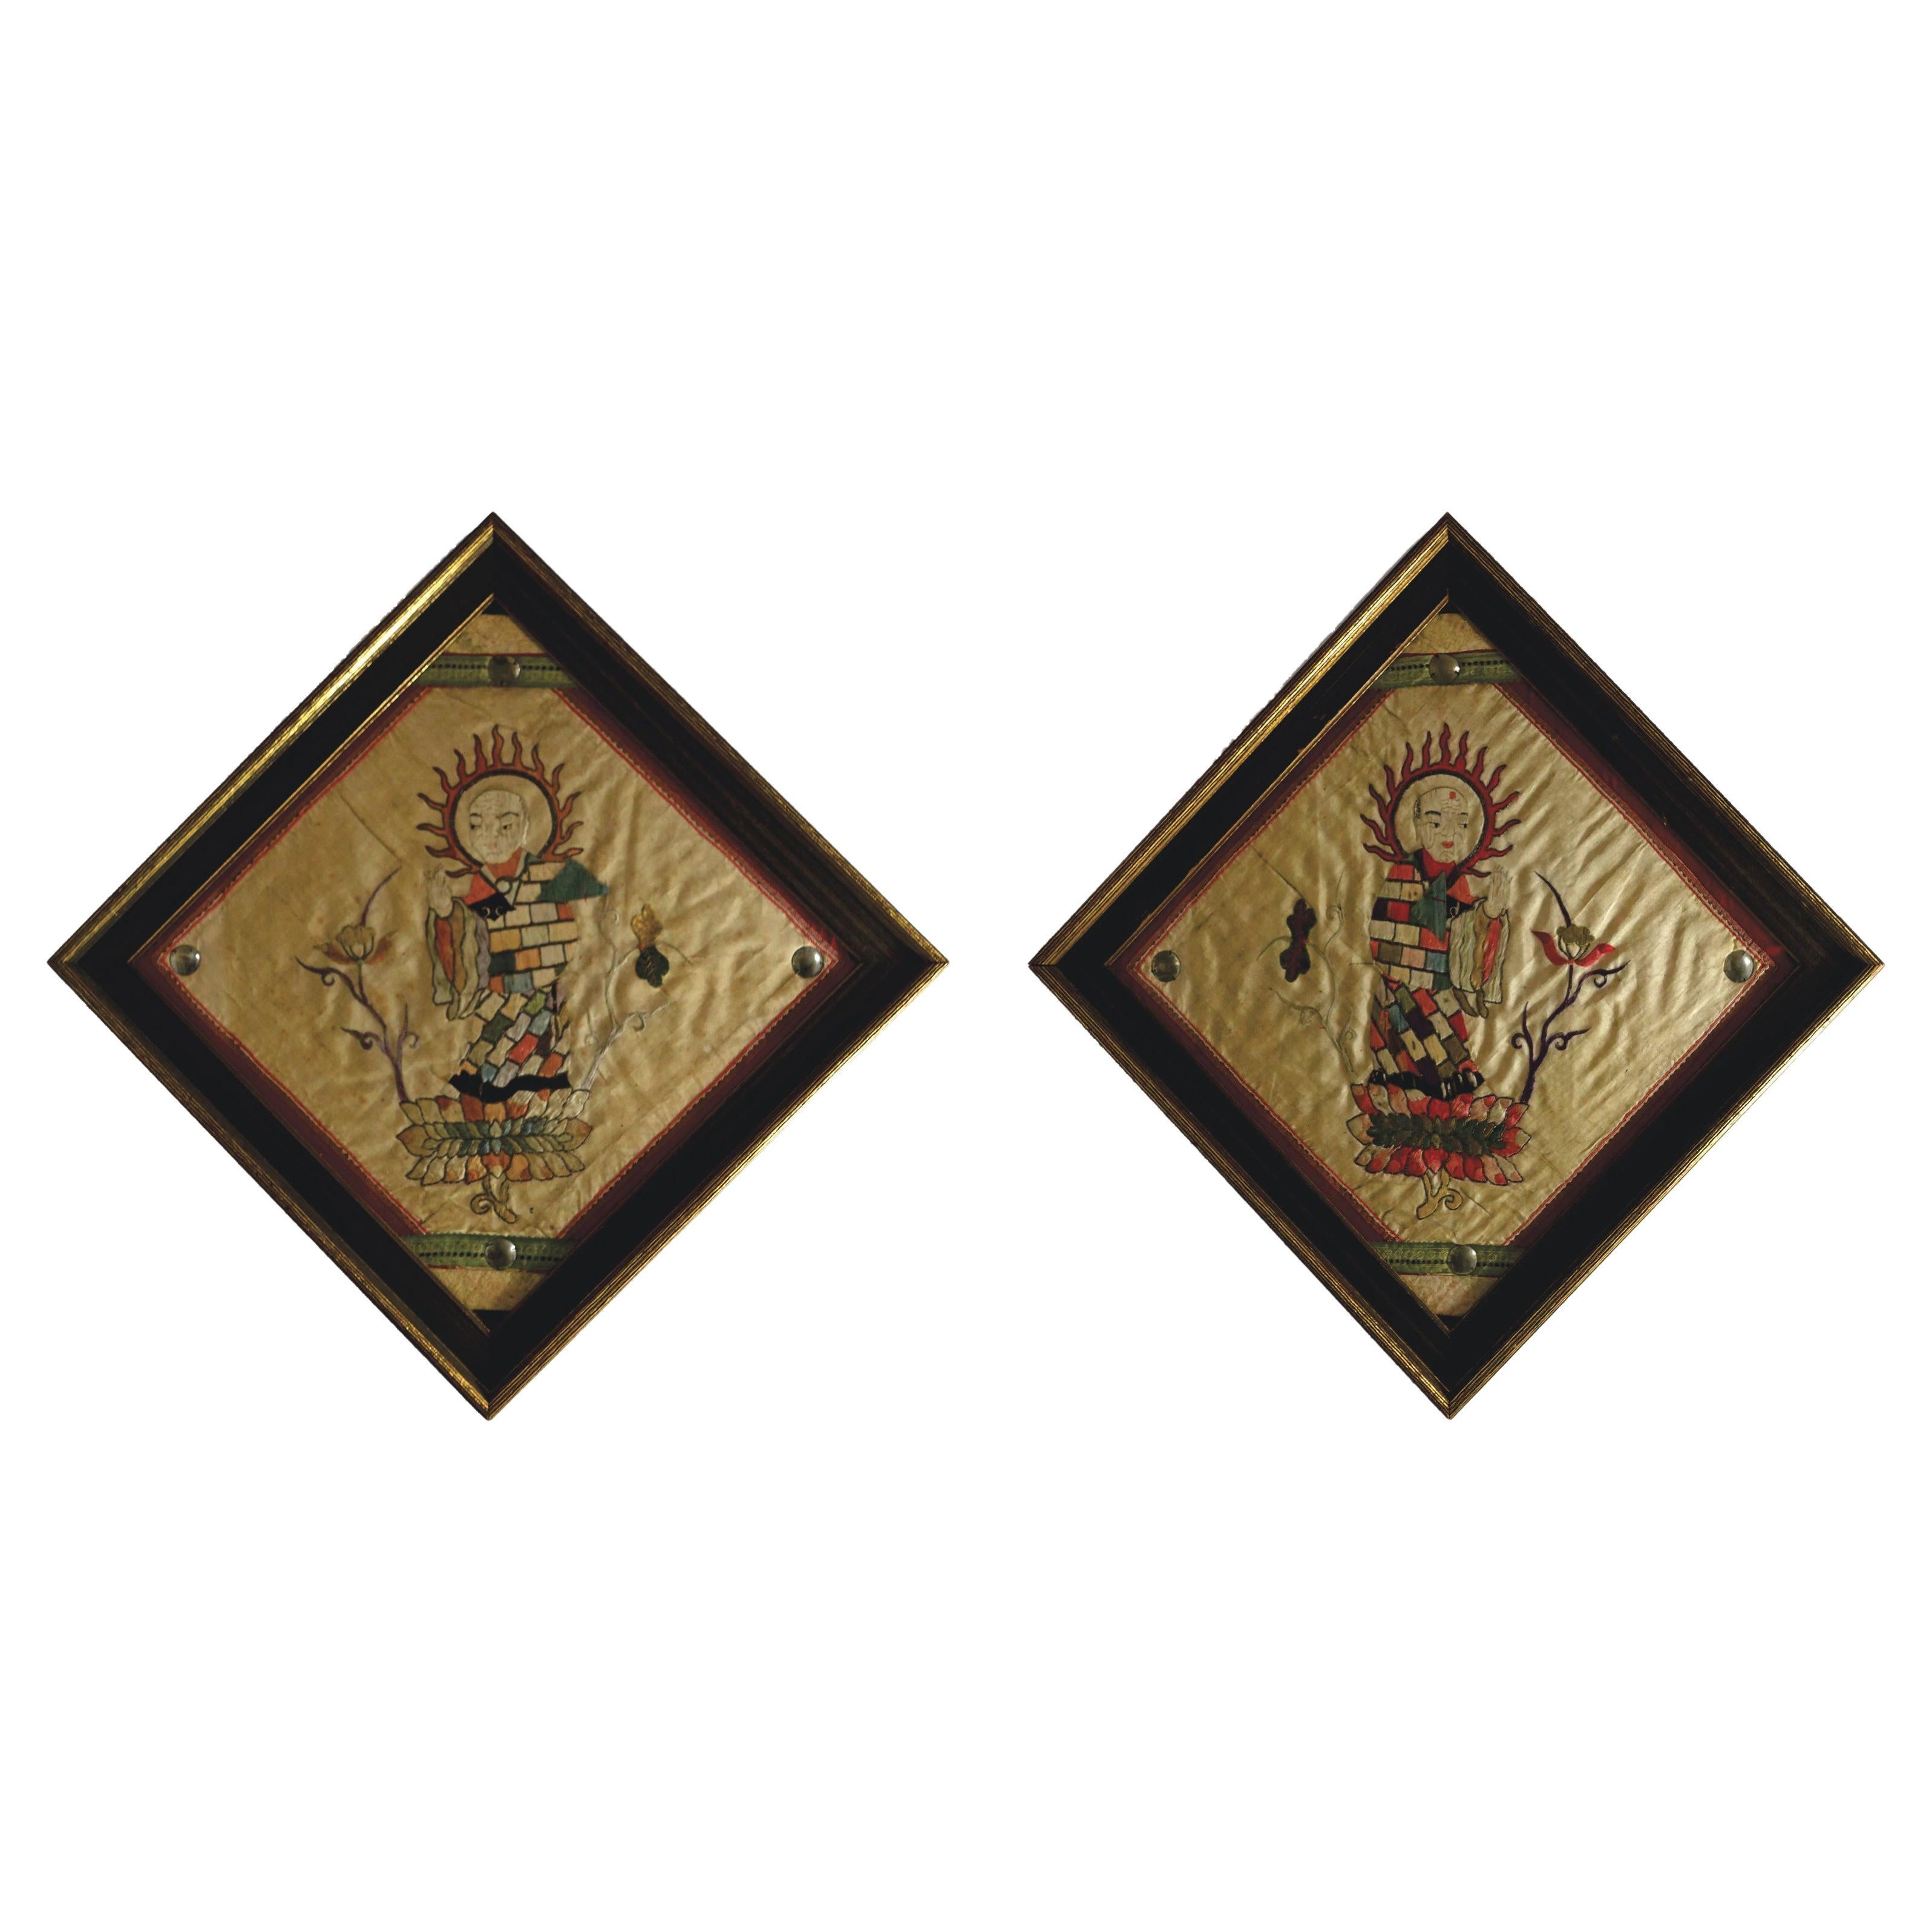 Antique Pair of Embroidered Panels of Buddhist Saint 'Lohans'